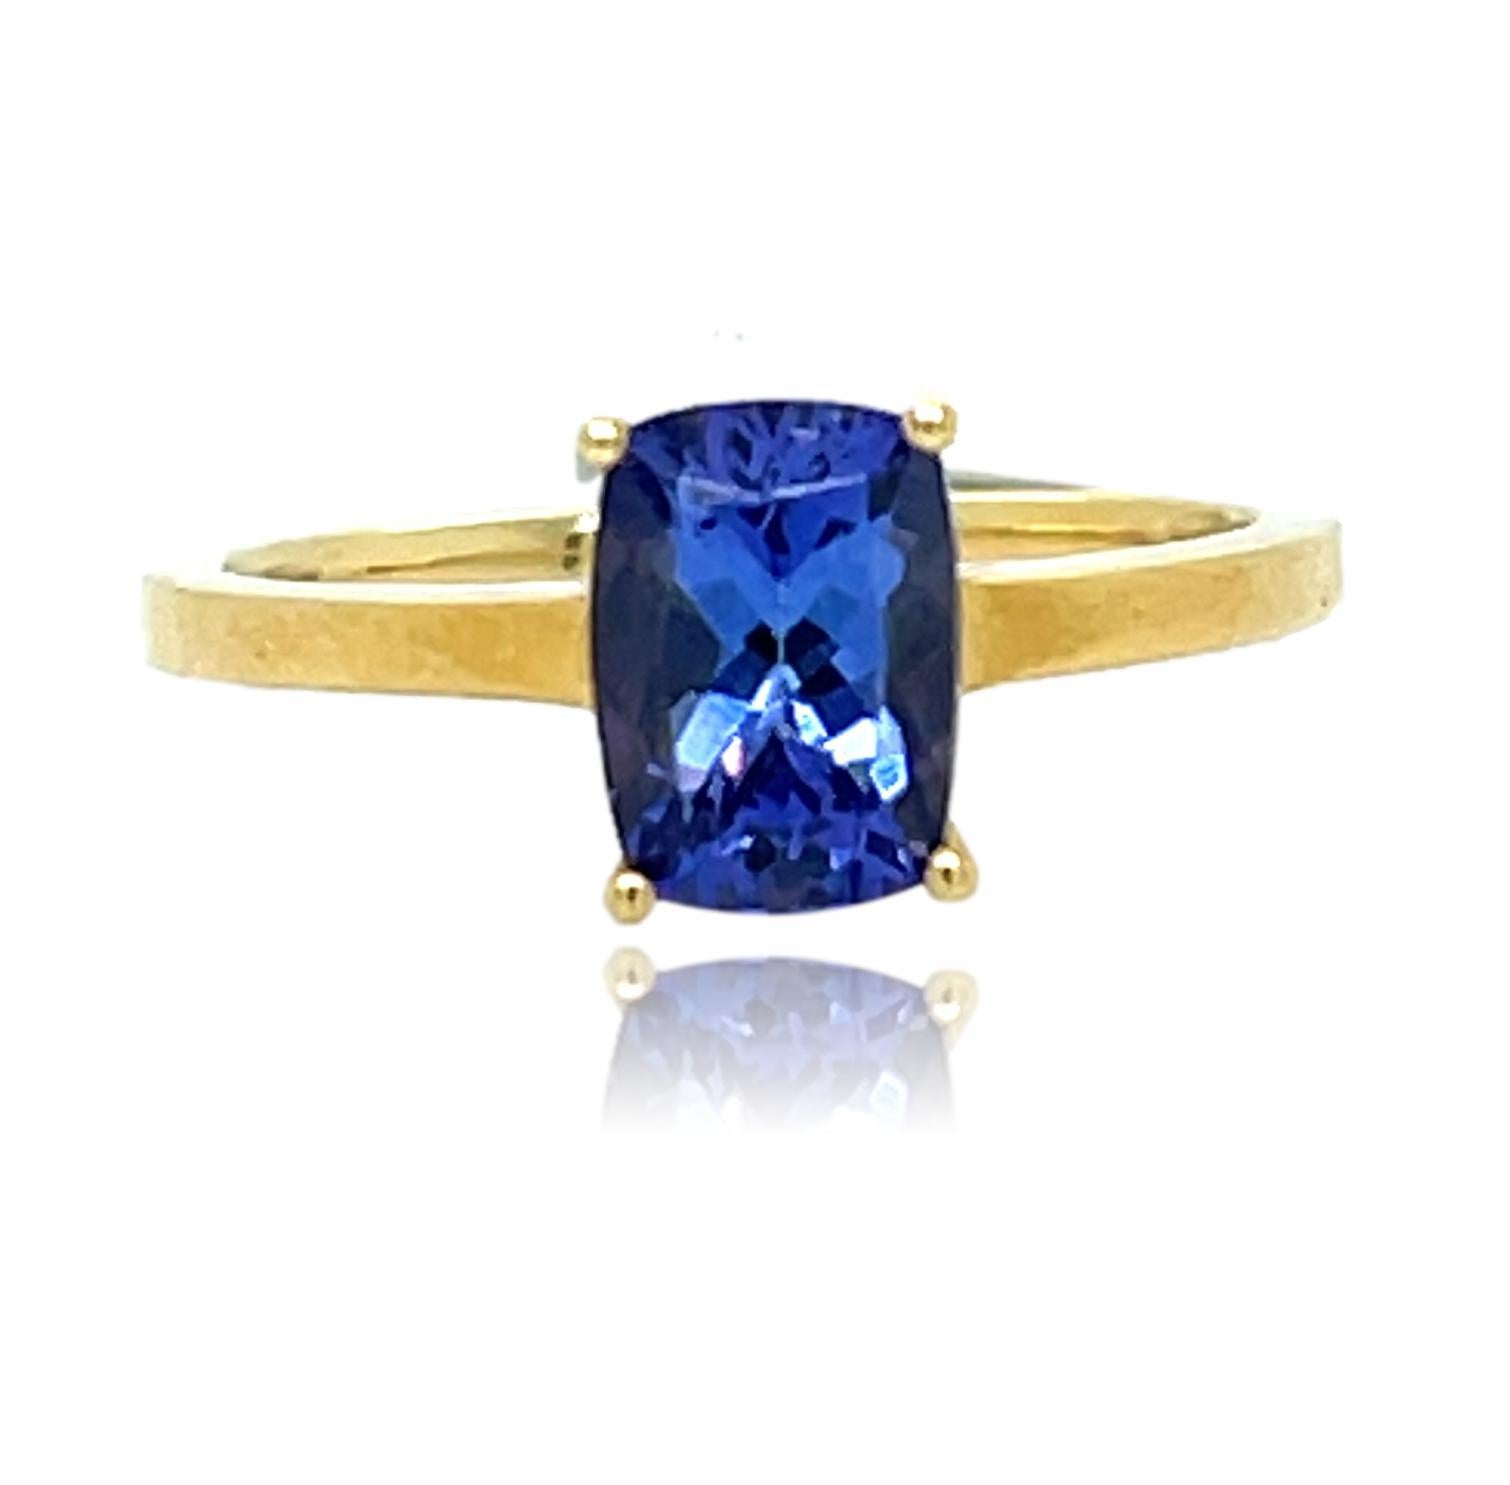 This stunning AAA quality Tanzanite ring is set in 18K yellow gold. There is an 8x6 mm cushion cut Tanzanite with 4 prong setting. It comes in a beautiful box ready for the perfect gift!

18KW:            3.20 gms
Tanz wt:         1.42 cts, 8x6 mm